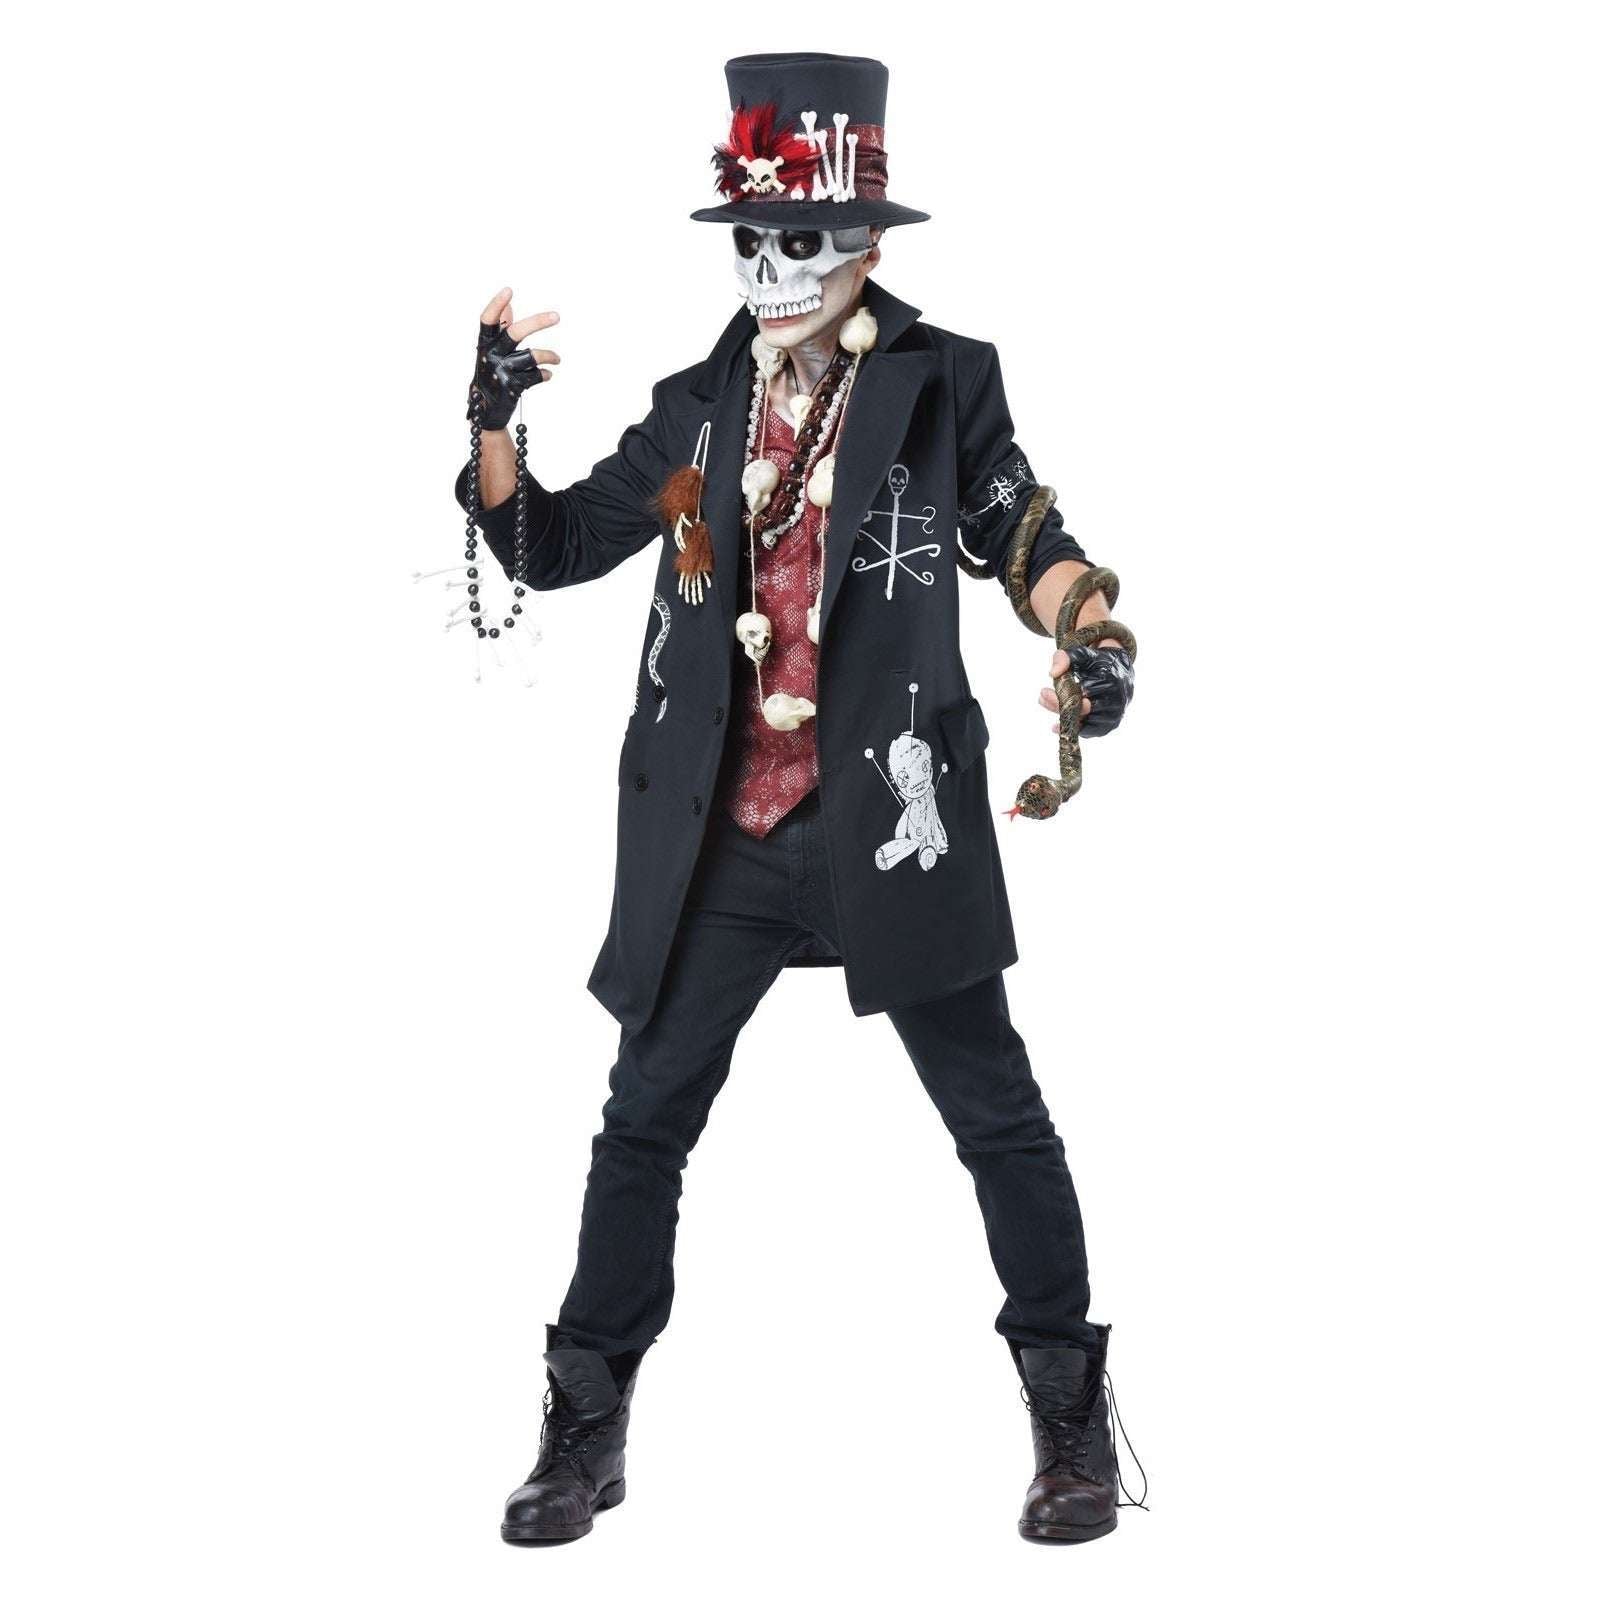 Voodoo Dude Day of the Dead Adult Costume